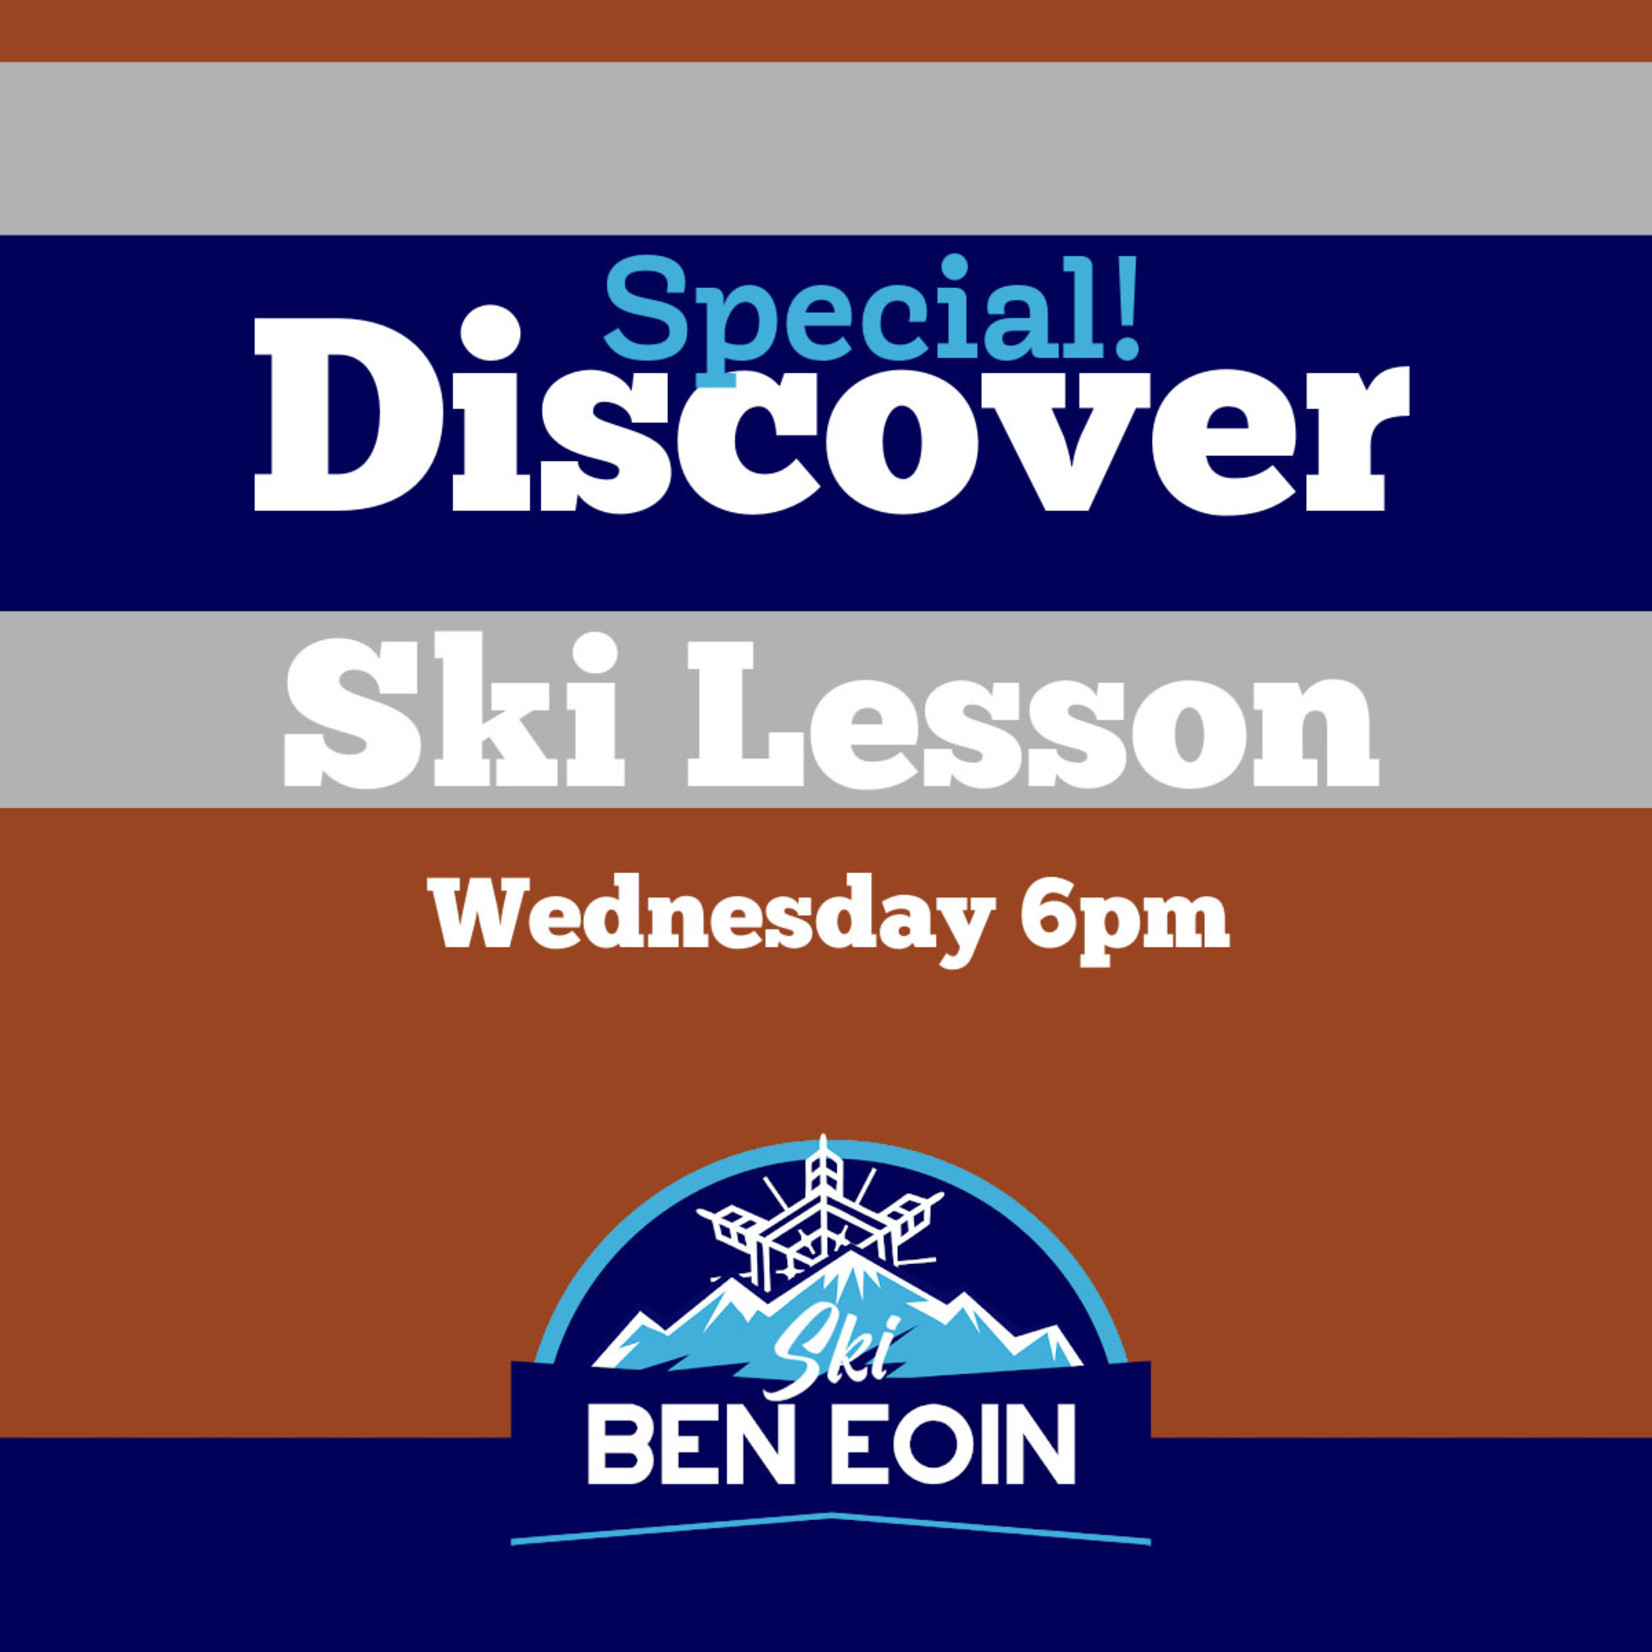 Discover SKI Wednesday 6pm *valid only for March 22nd